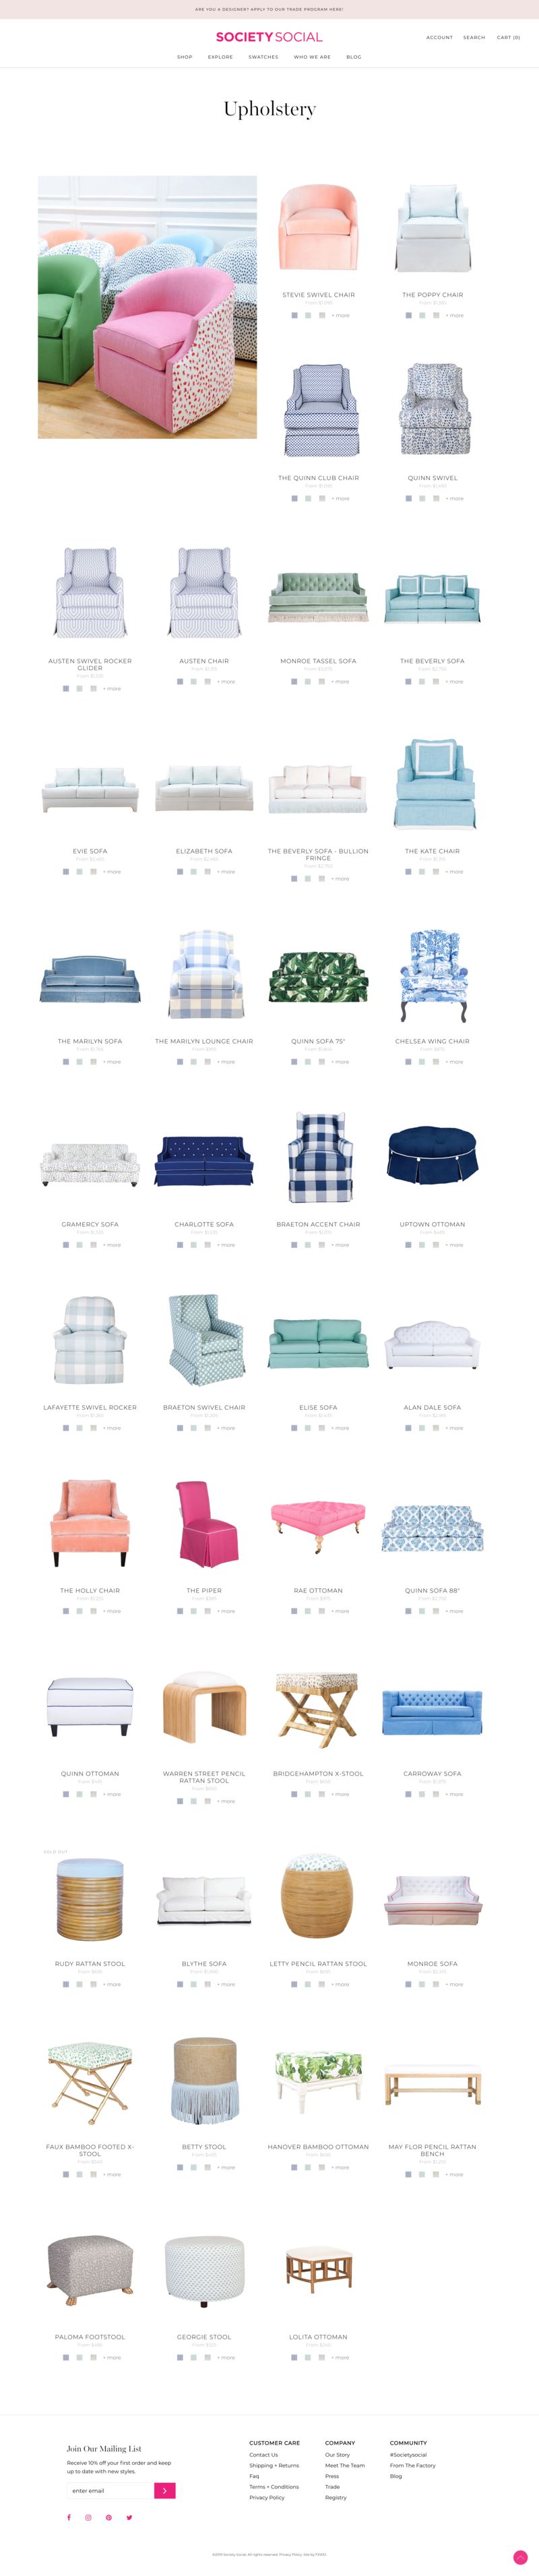 screencapture-shopsocietysocial-collections-custom-upholstery-2020-01-30-14_36_23